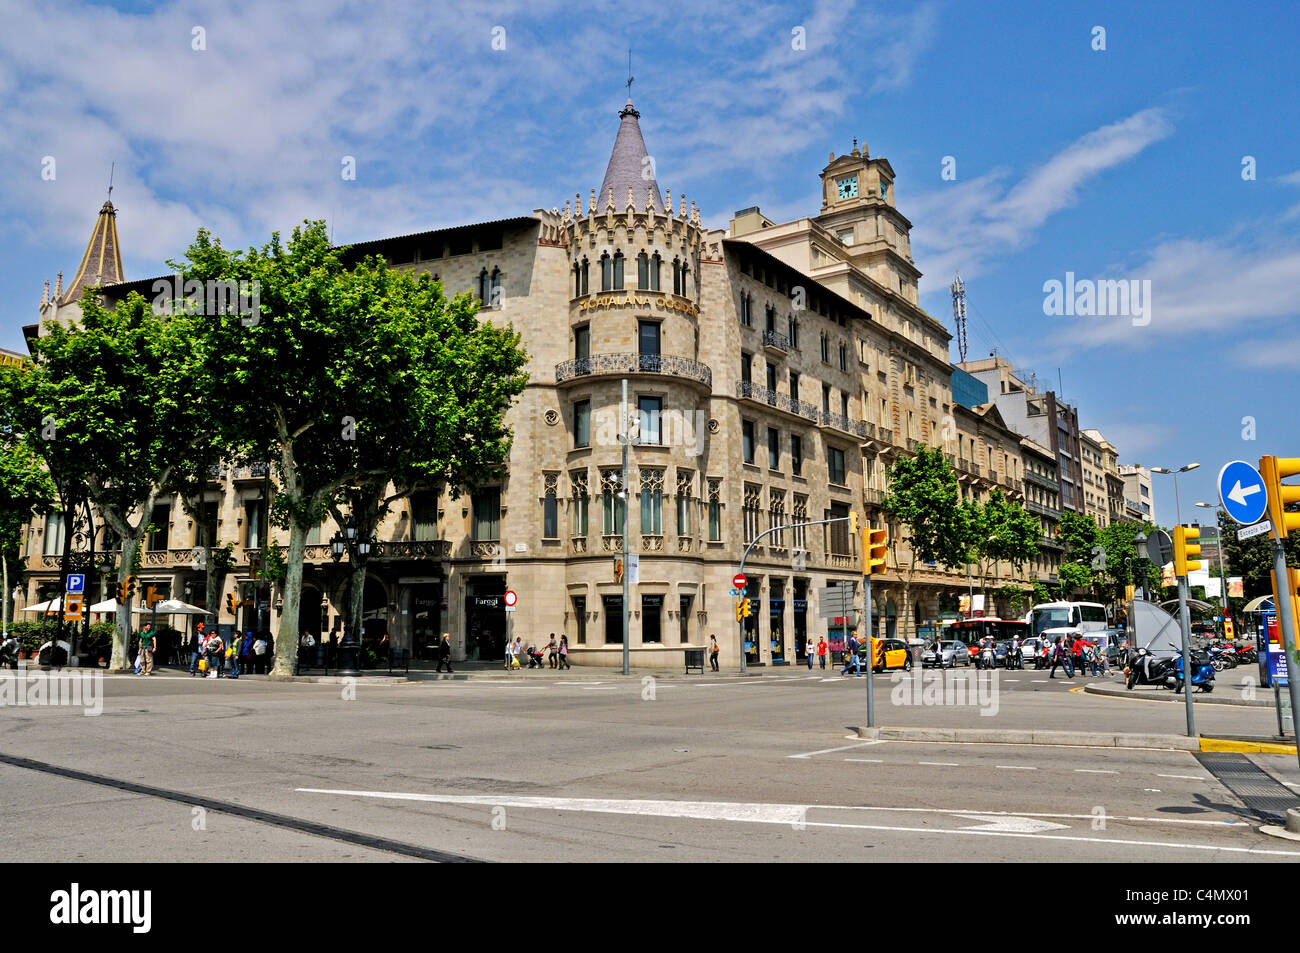 The elegant facade and towers of the Casa Pascual i Pons by the architect Enric Sagnier Villavecchia, Eixample, Barcelona Stock Photo